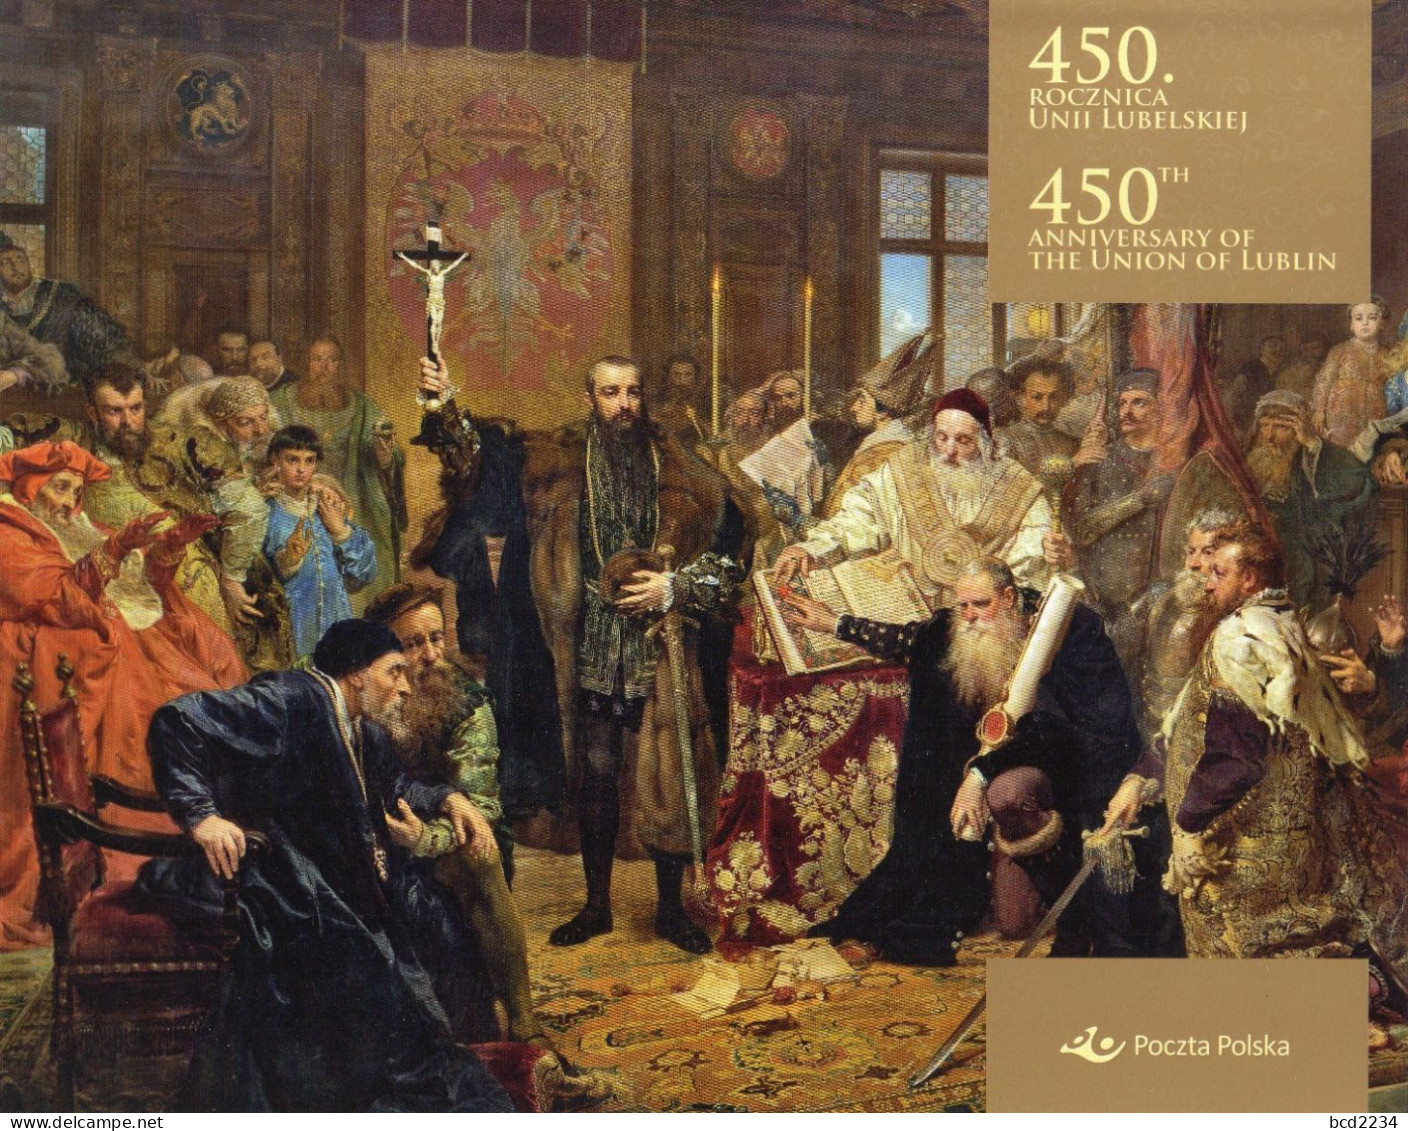 POLAND 2019 POLISH POST OFFICE LIMITED EDITION FOLDER: 450TH ANNIVERSARY OF UNION OF LUBLIN MS LITHUANIA KINGS ROYALS - Cartas & Documentos